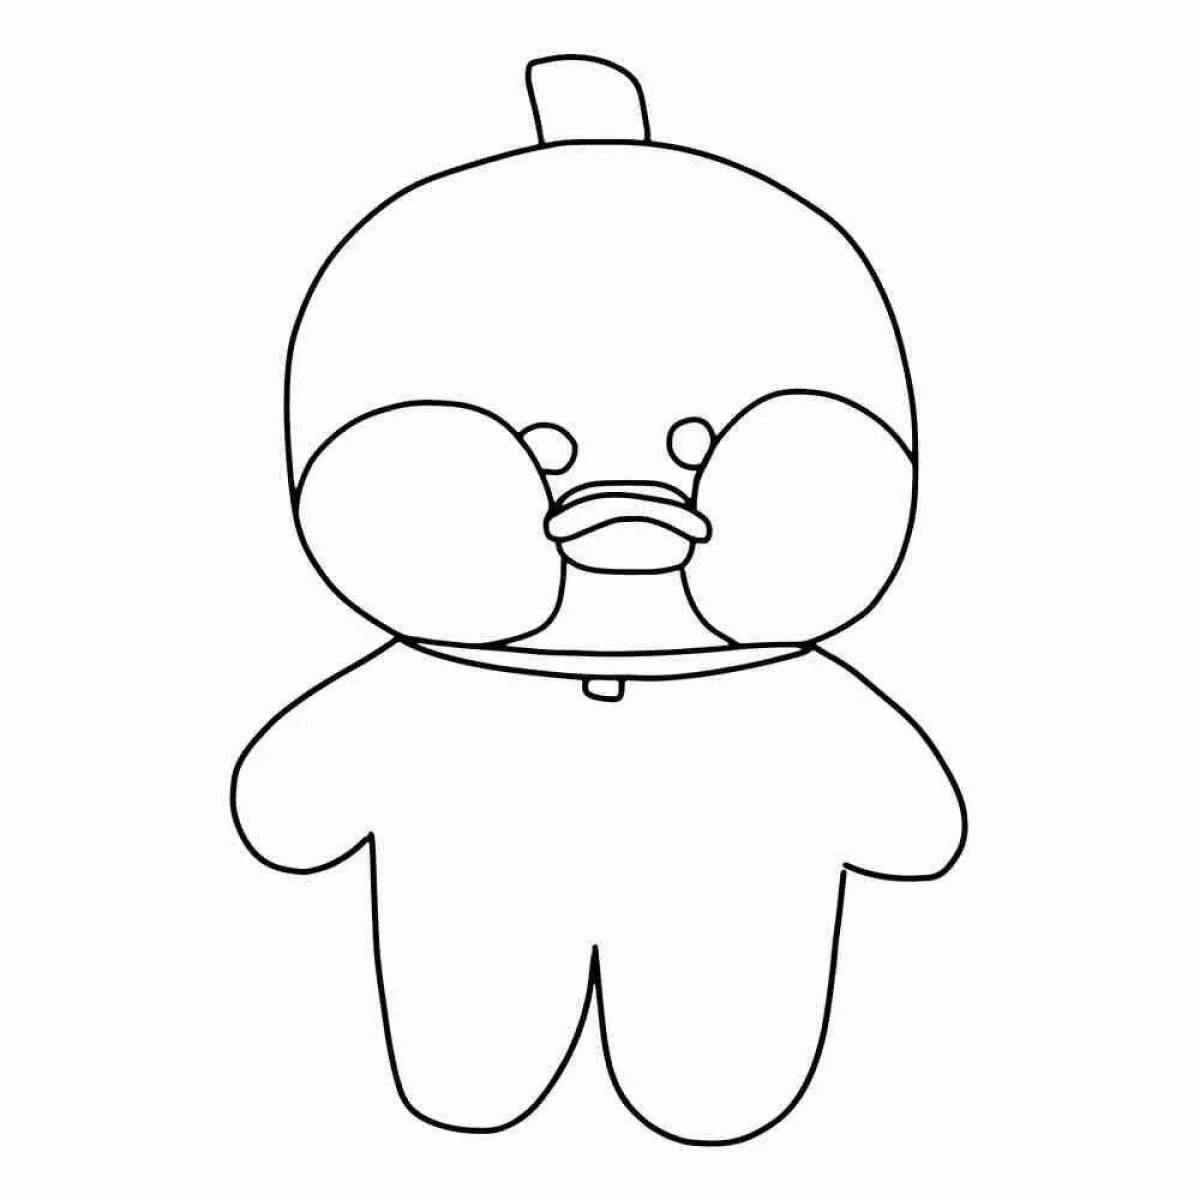 Colorful lalafanfan duck coloring page for kids